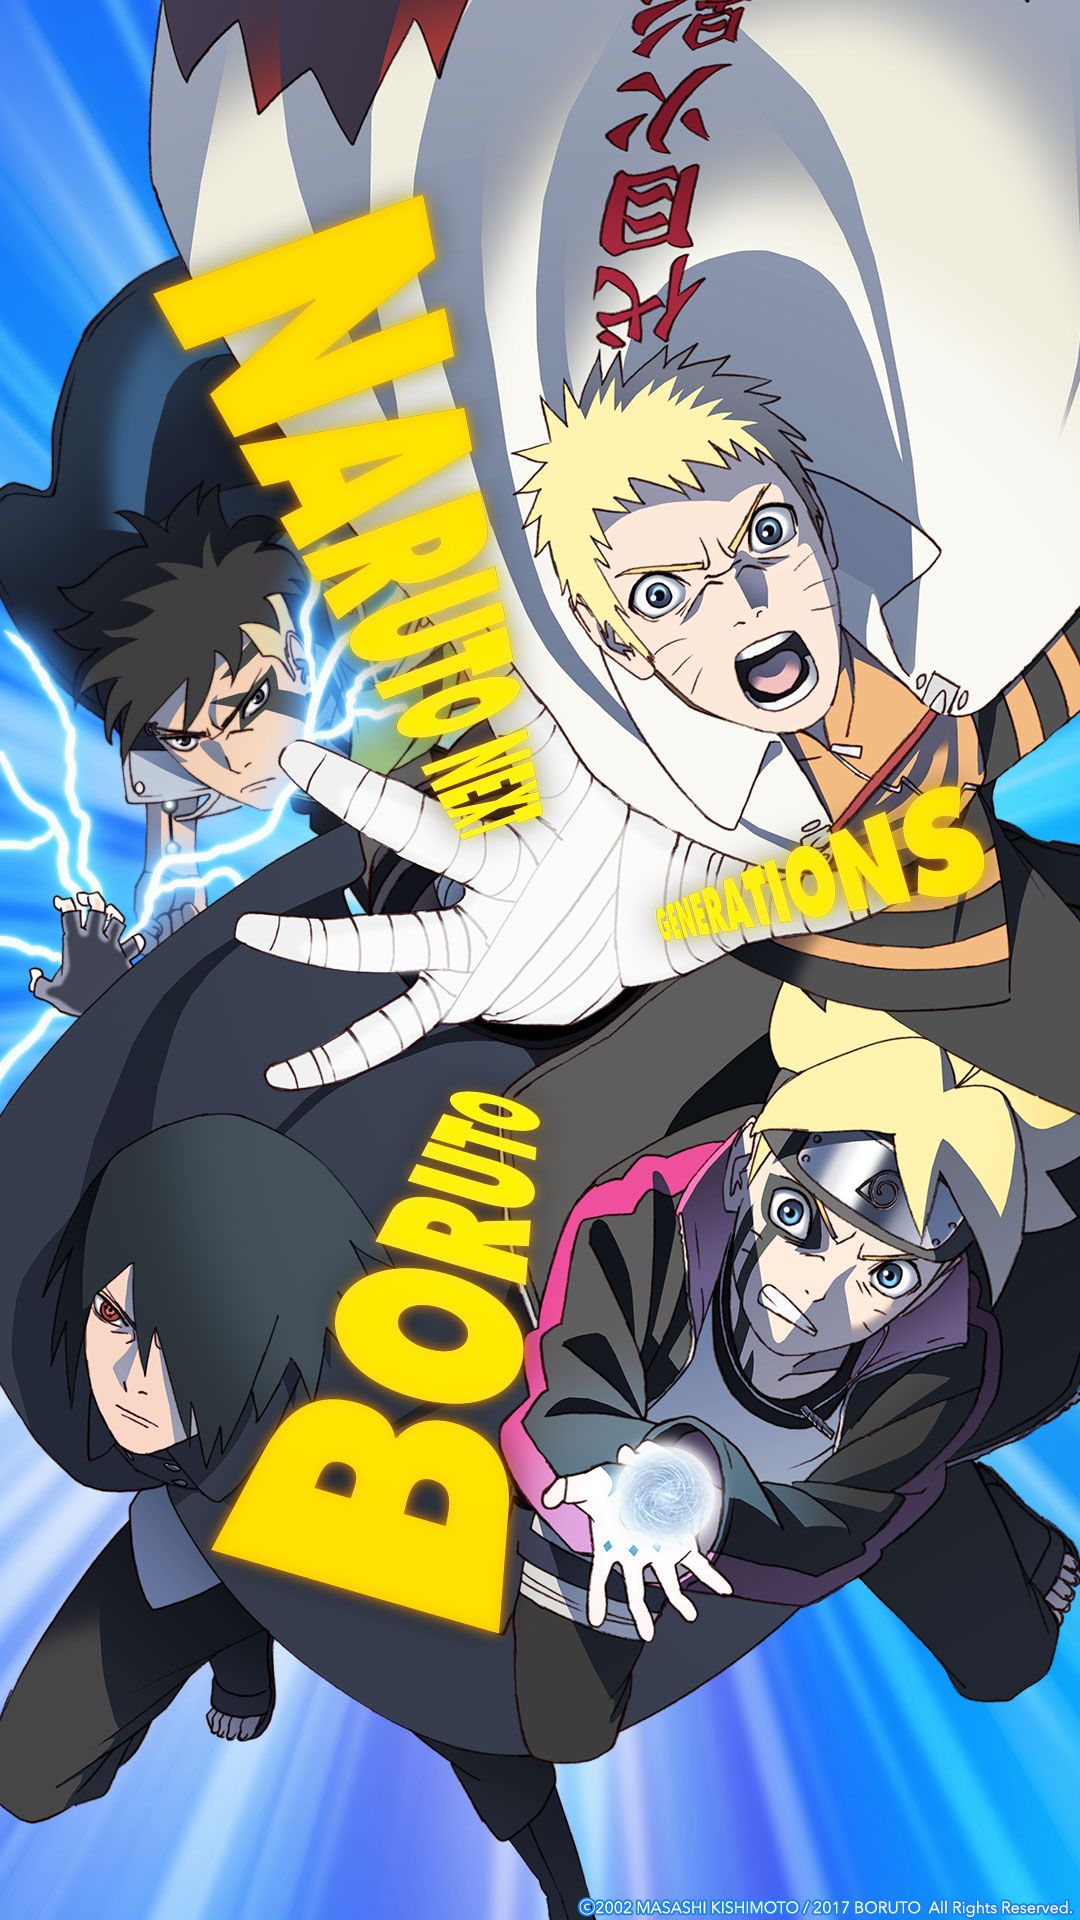 VIZ no Twitter: "@y0ung8a66erdic New dubbed episodes of Boruto release with each home video drop! We just released the latest set last month so hang tight for upcoming releases!" /